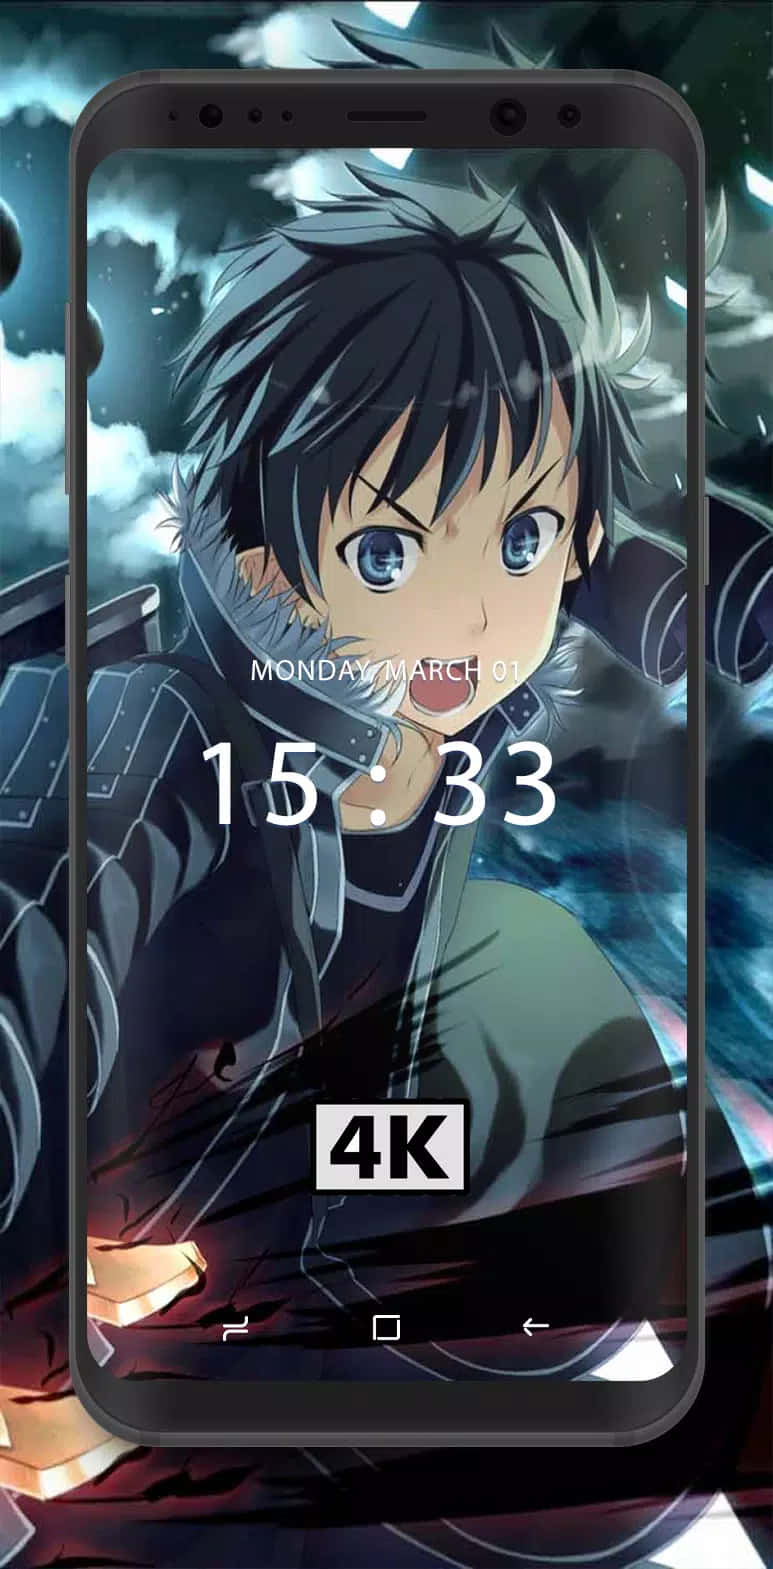 This stylish Sword Art Online phone will help you stay connected. Wallpaper